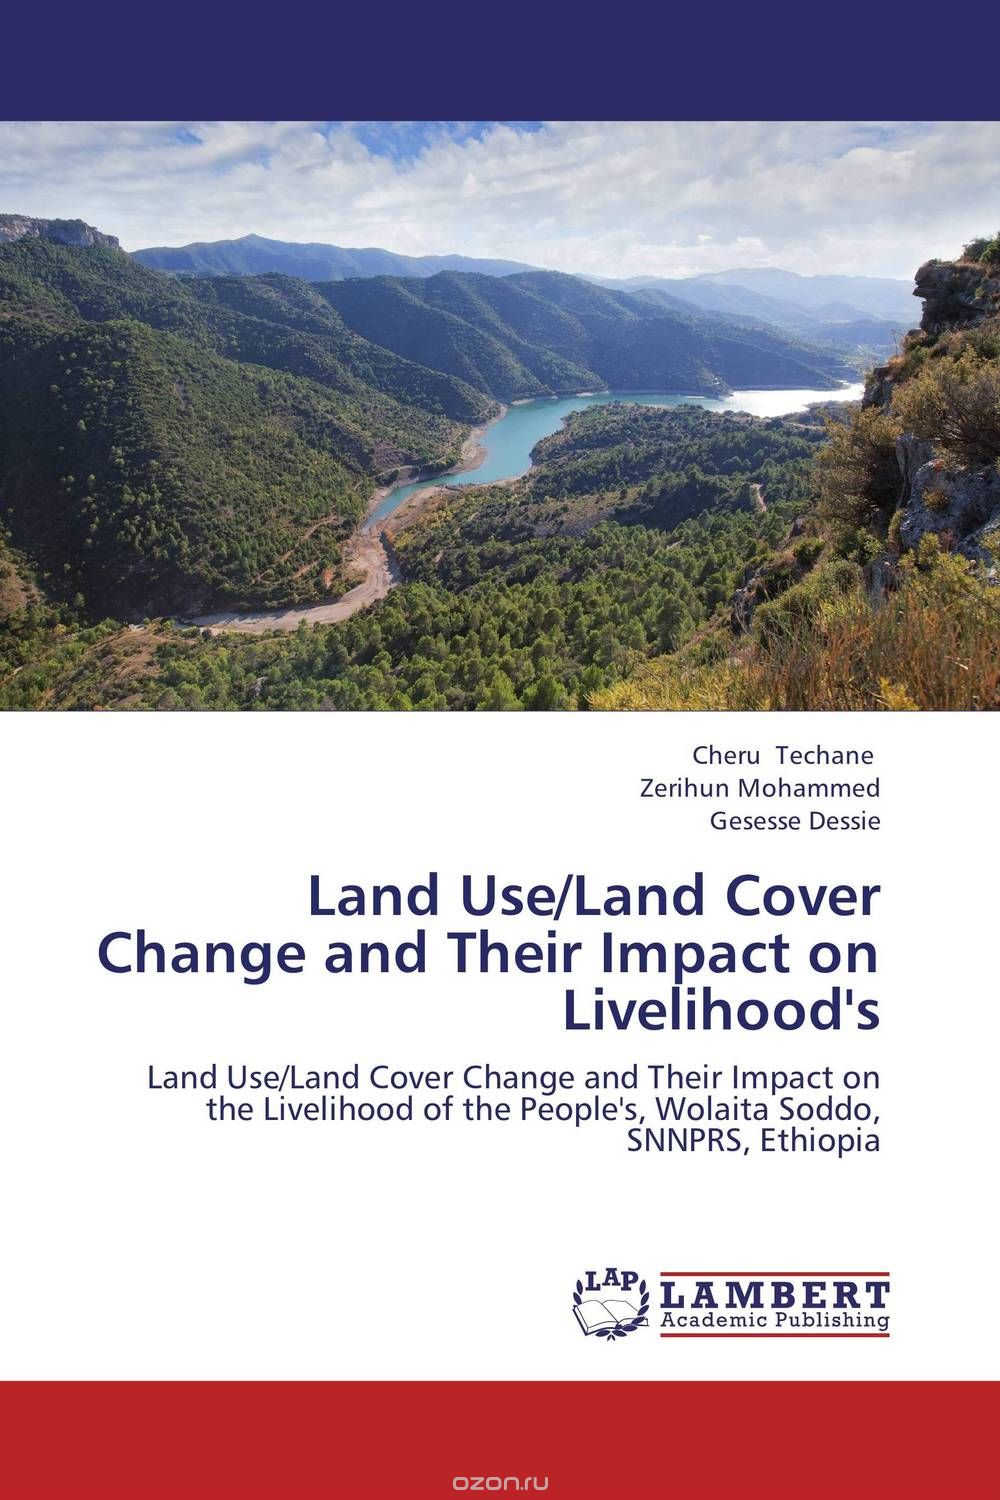 Land Use/Land Cover Change and Their Impact on Livelihood's